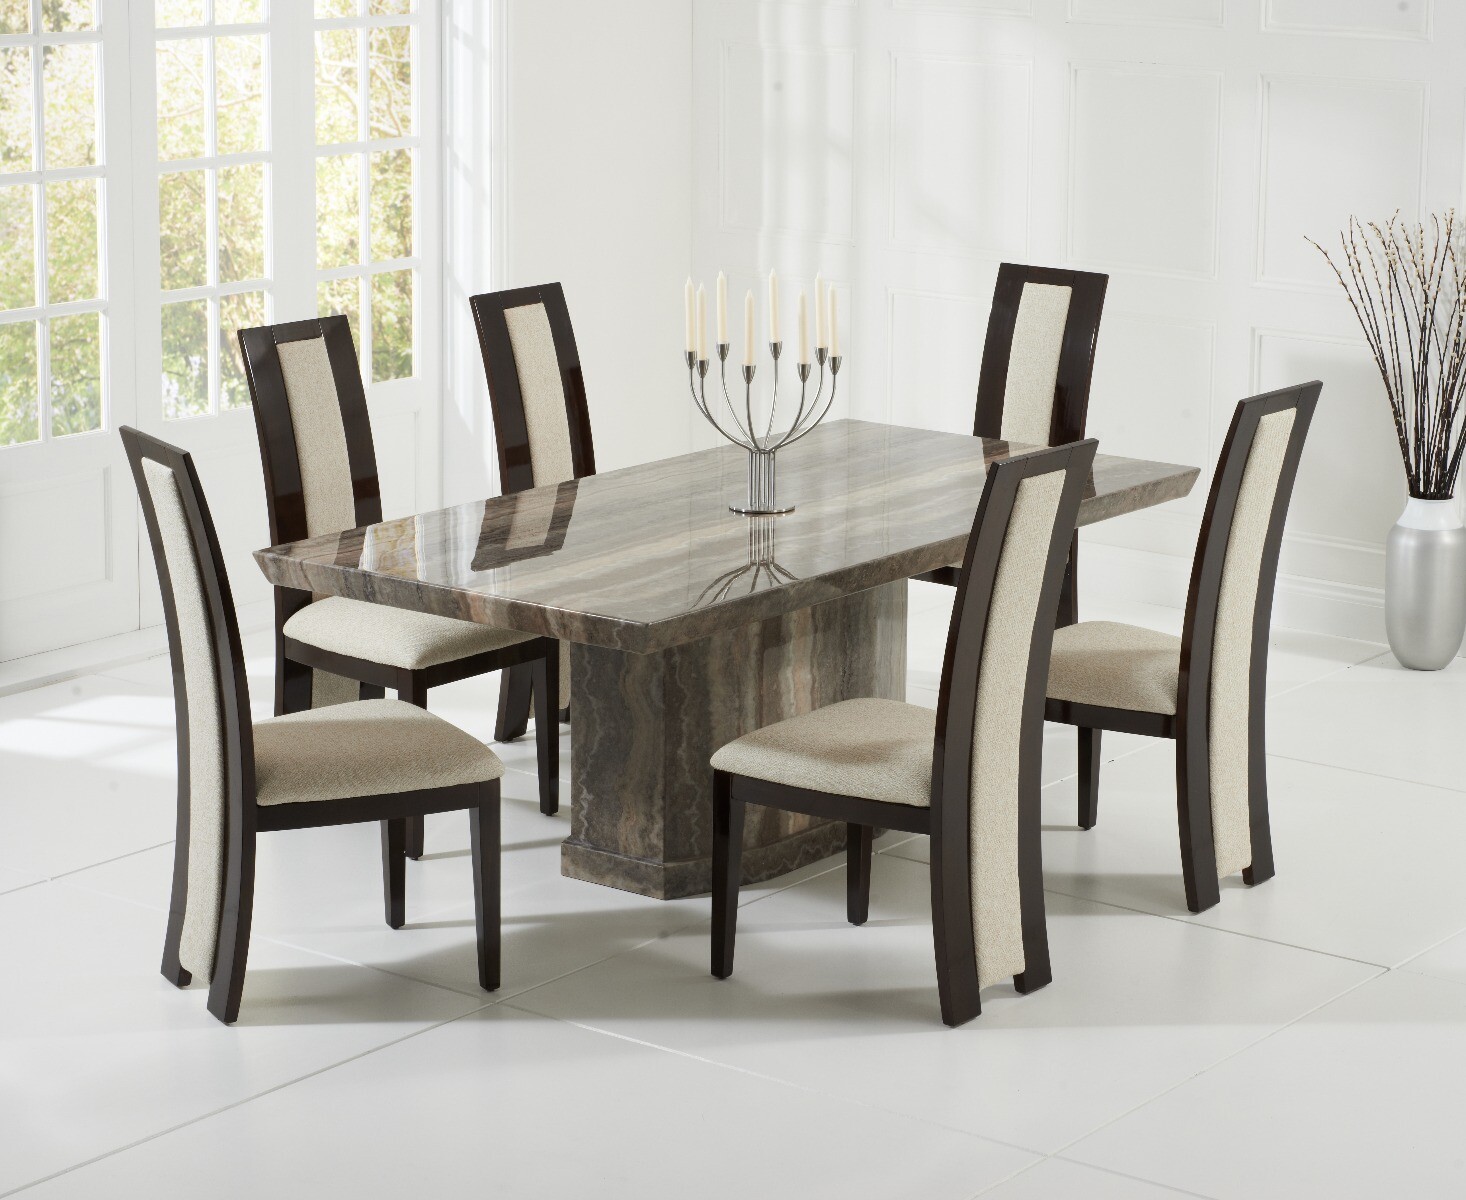 Carvelle 160cm Brown Pedestal Marble Dining Table With 6 Black Novara Chairs